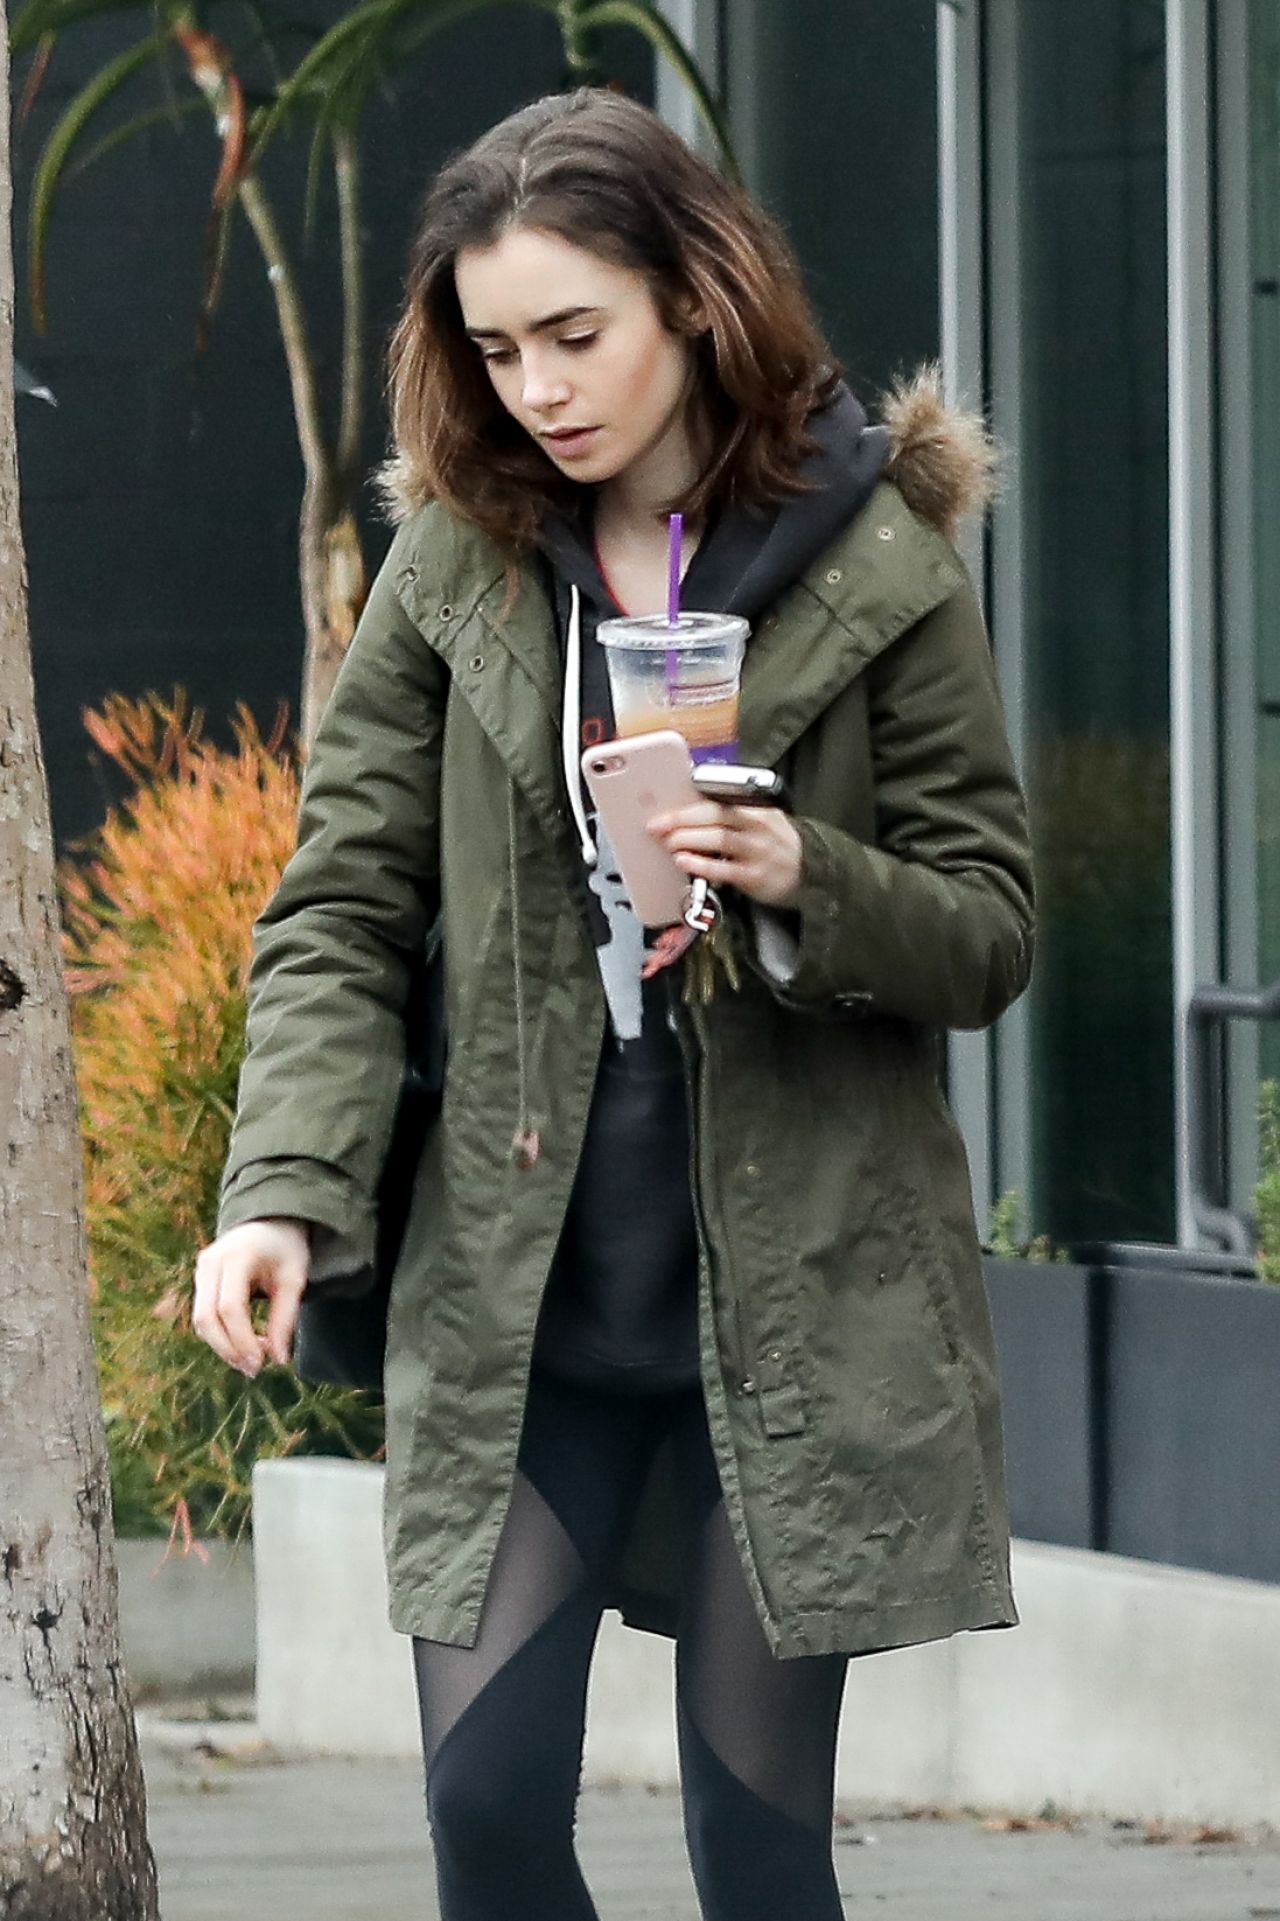 Lily Collins Los Angeles May 11, 2017 – Star Style